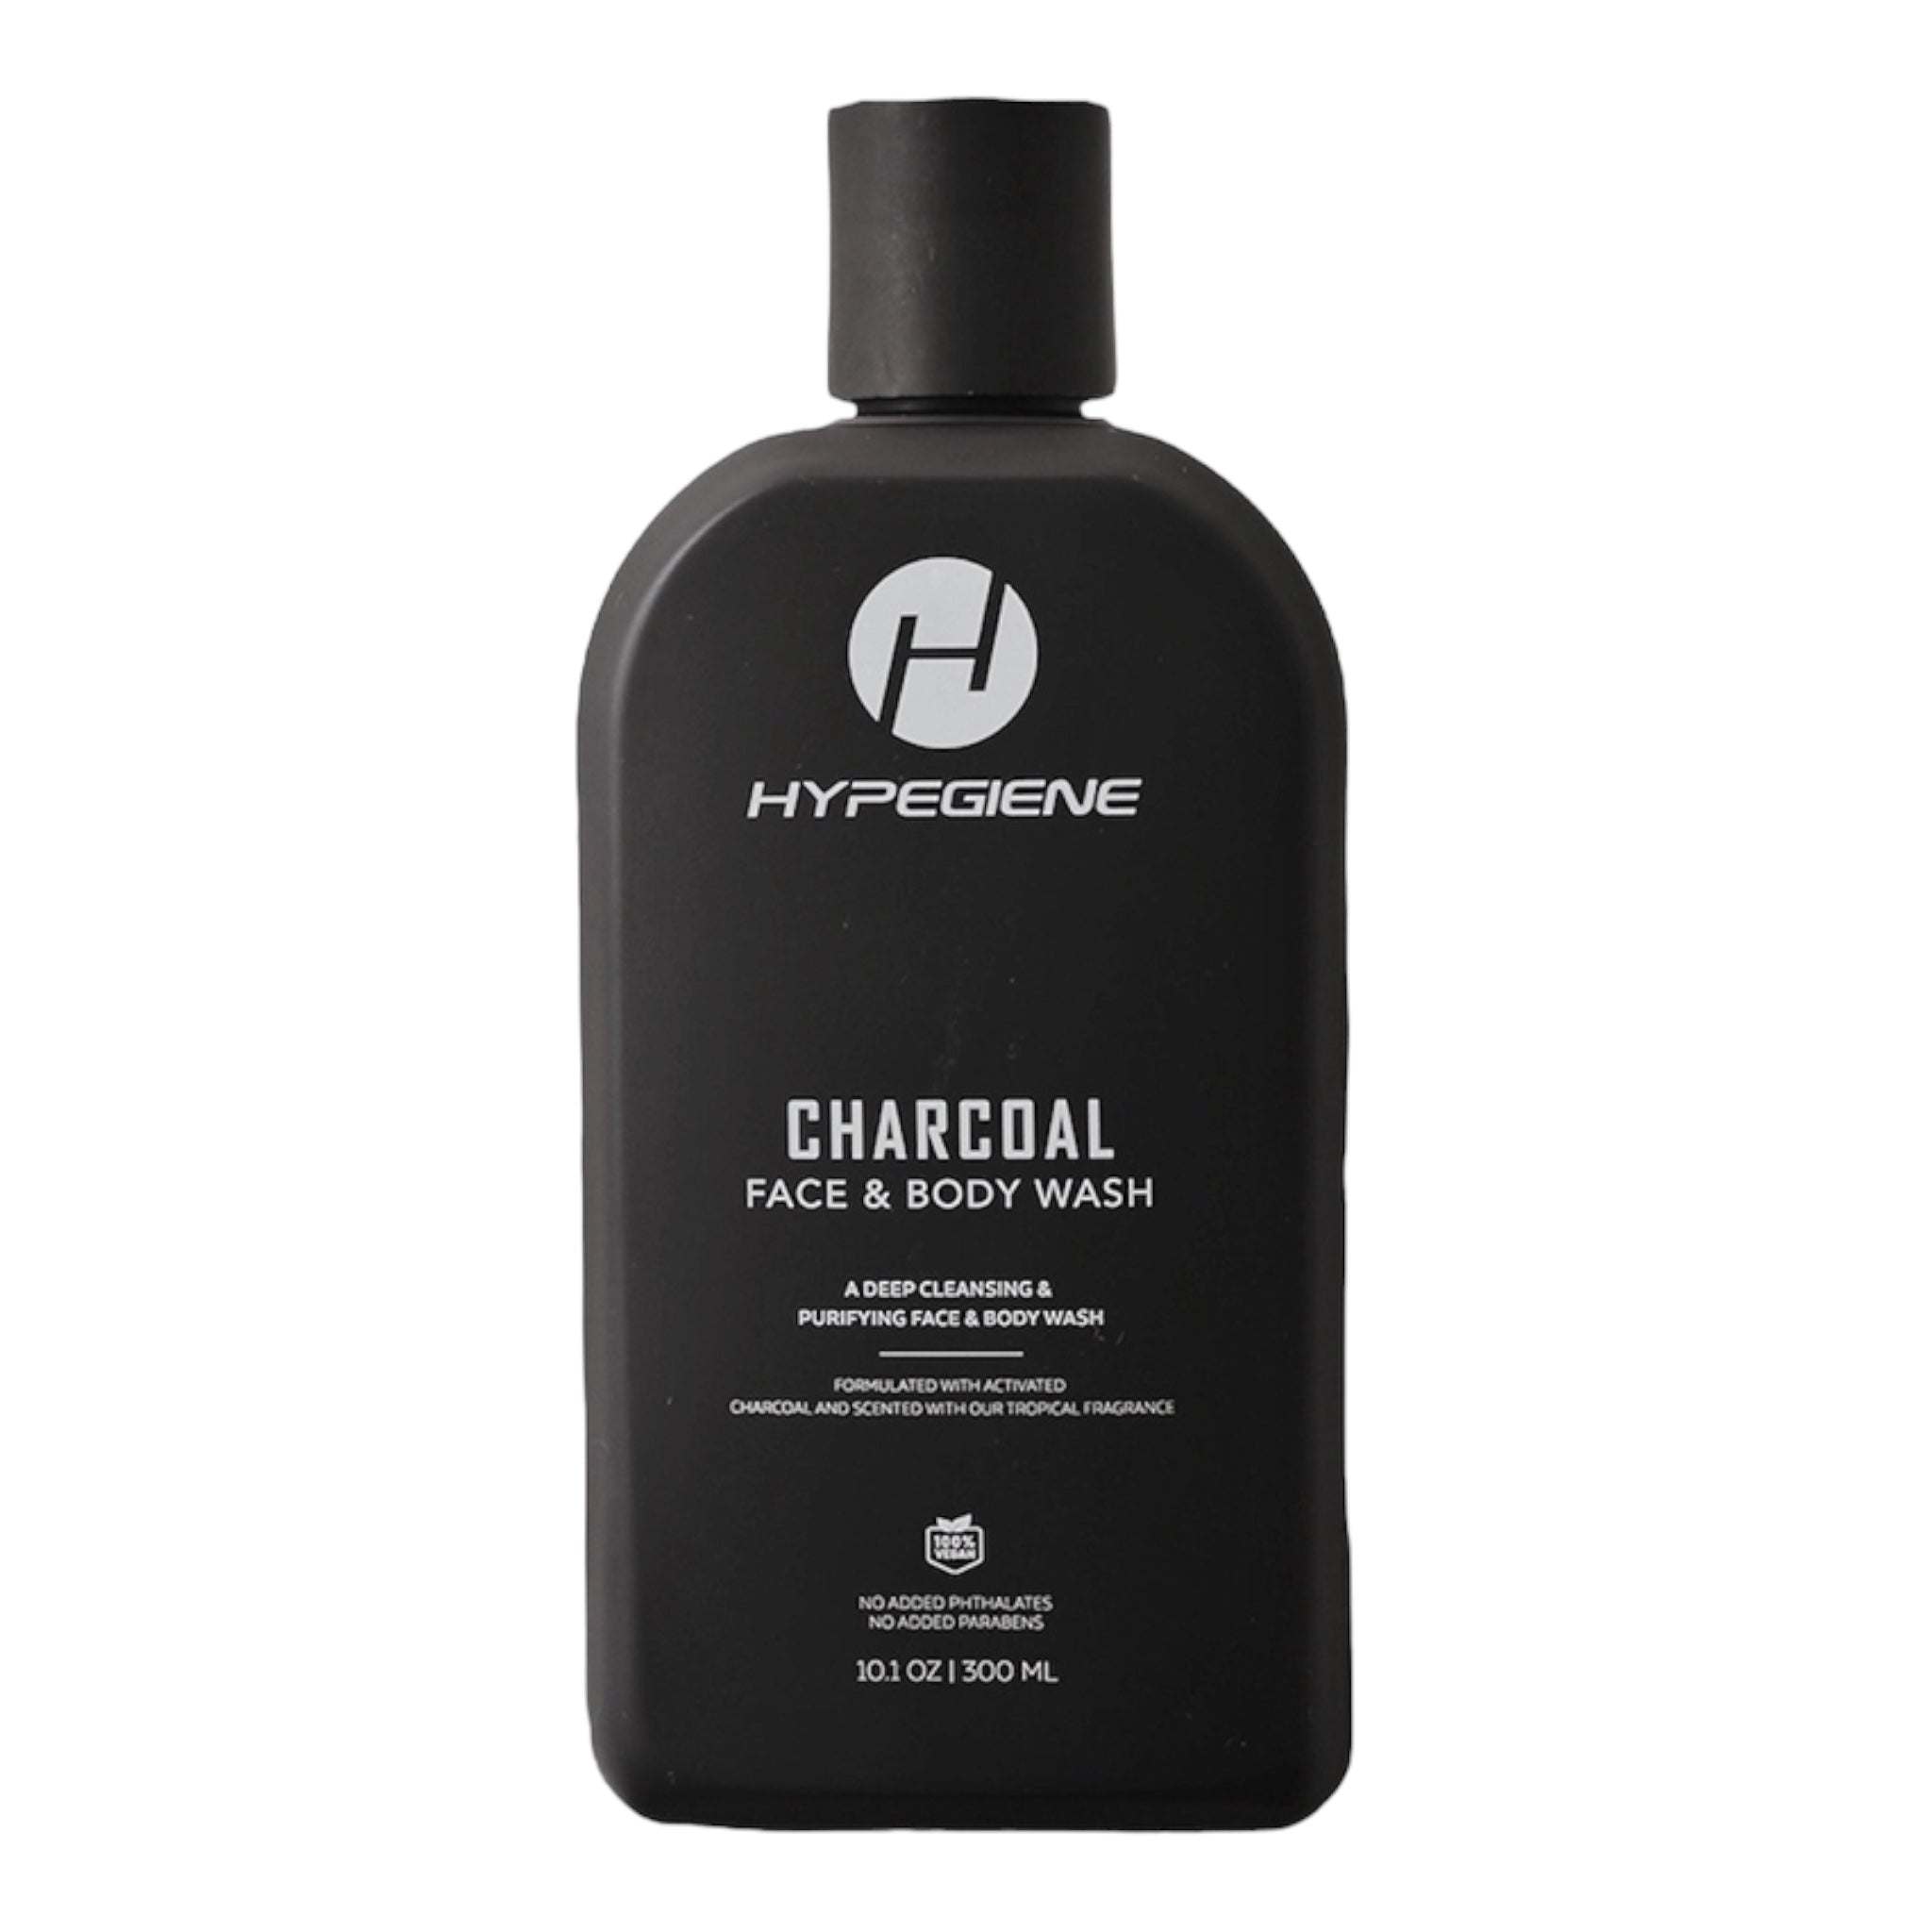 Hypegiene Charcoal Face & Body Wash